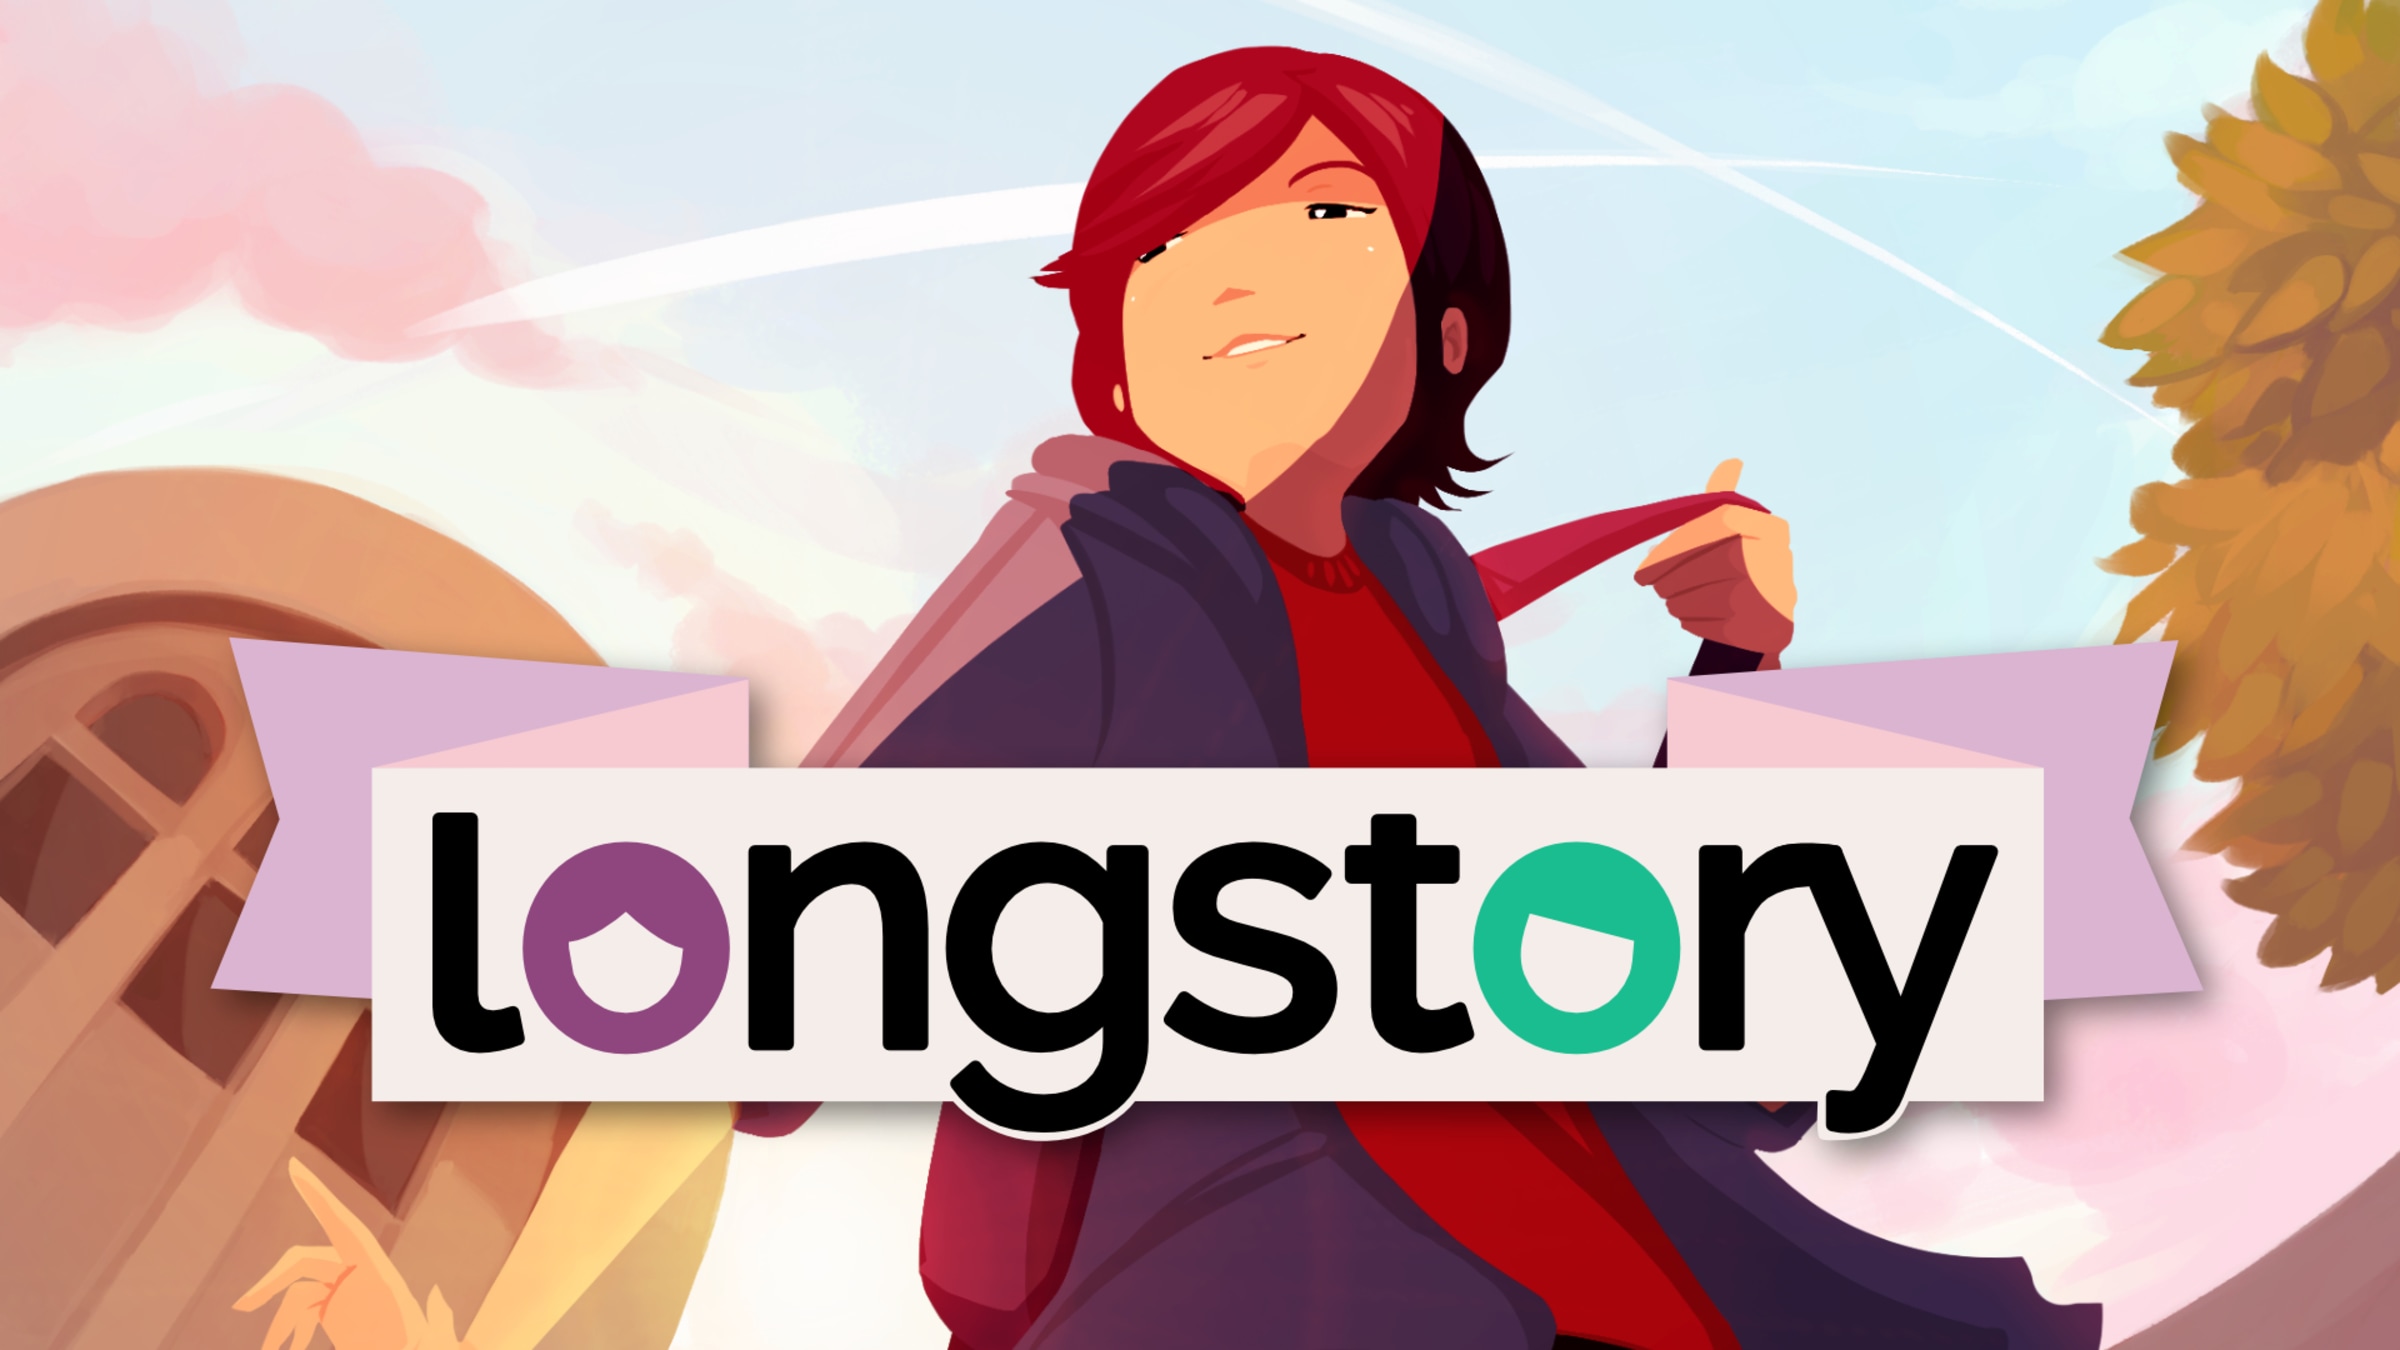 LongStory: A dating game for the for Nintendo Switch - Nintendo Official Site